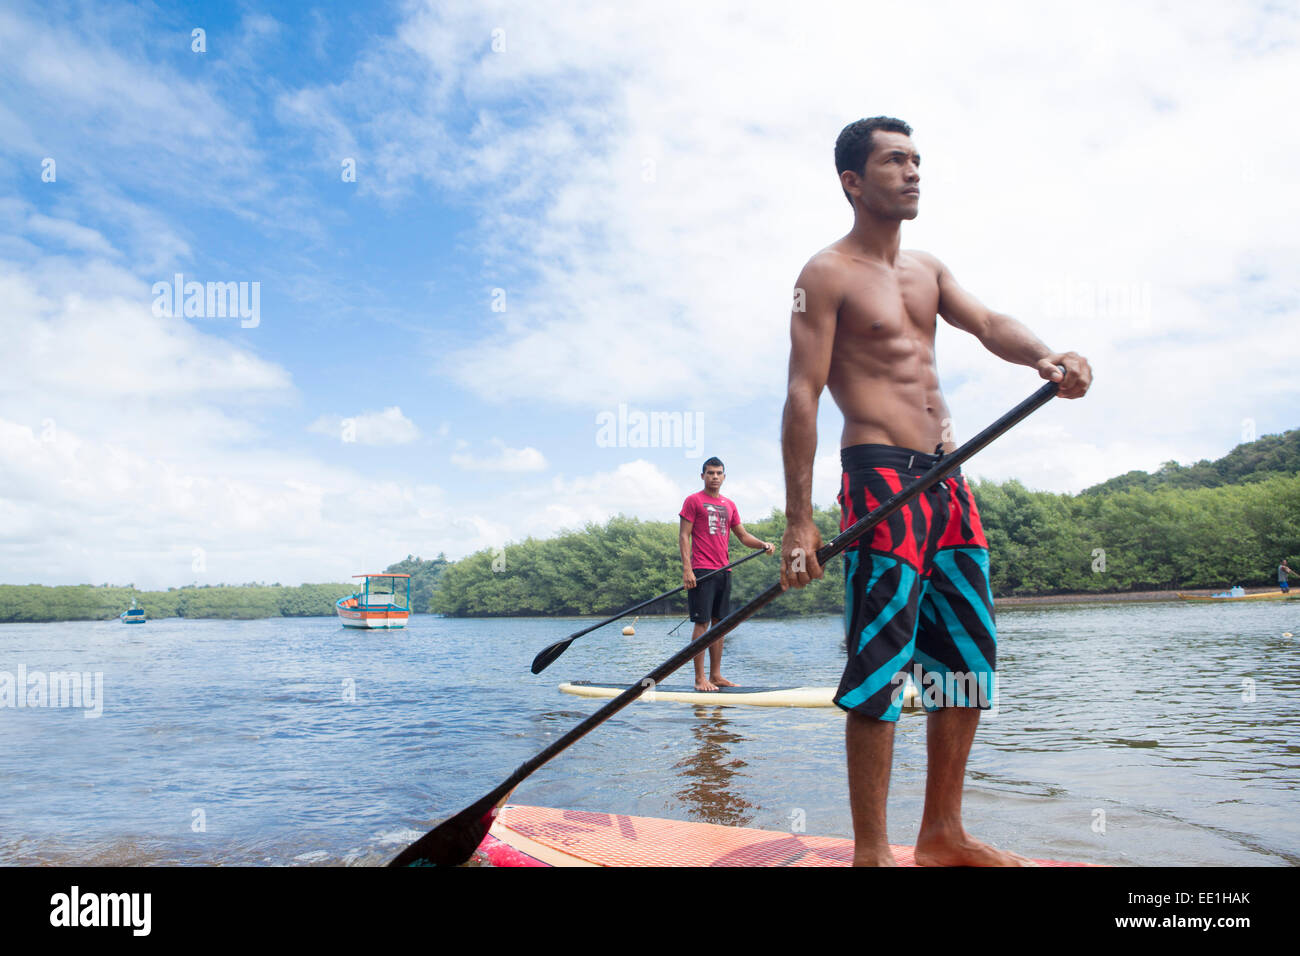 Locals riding stand-up surf boards, Caraiva River. Bahia, Brazil, South America Stock Photo